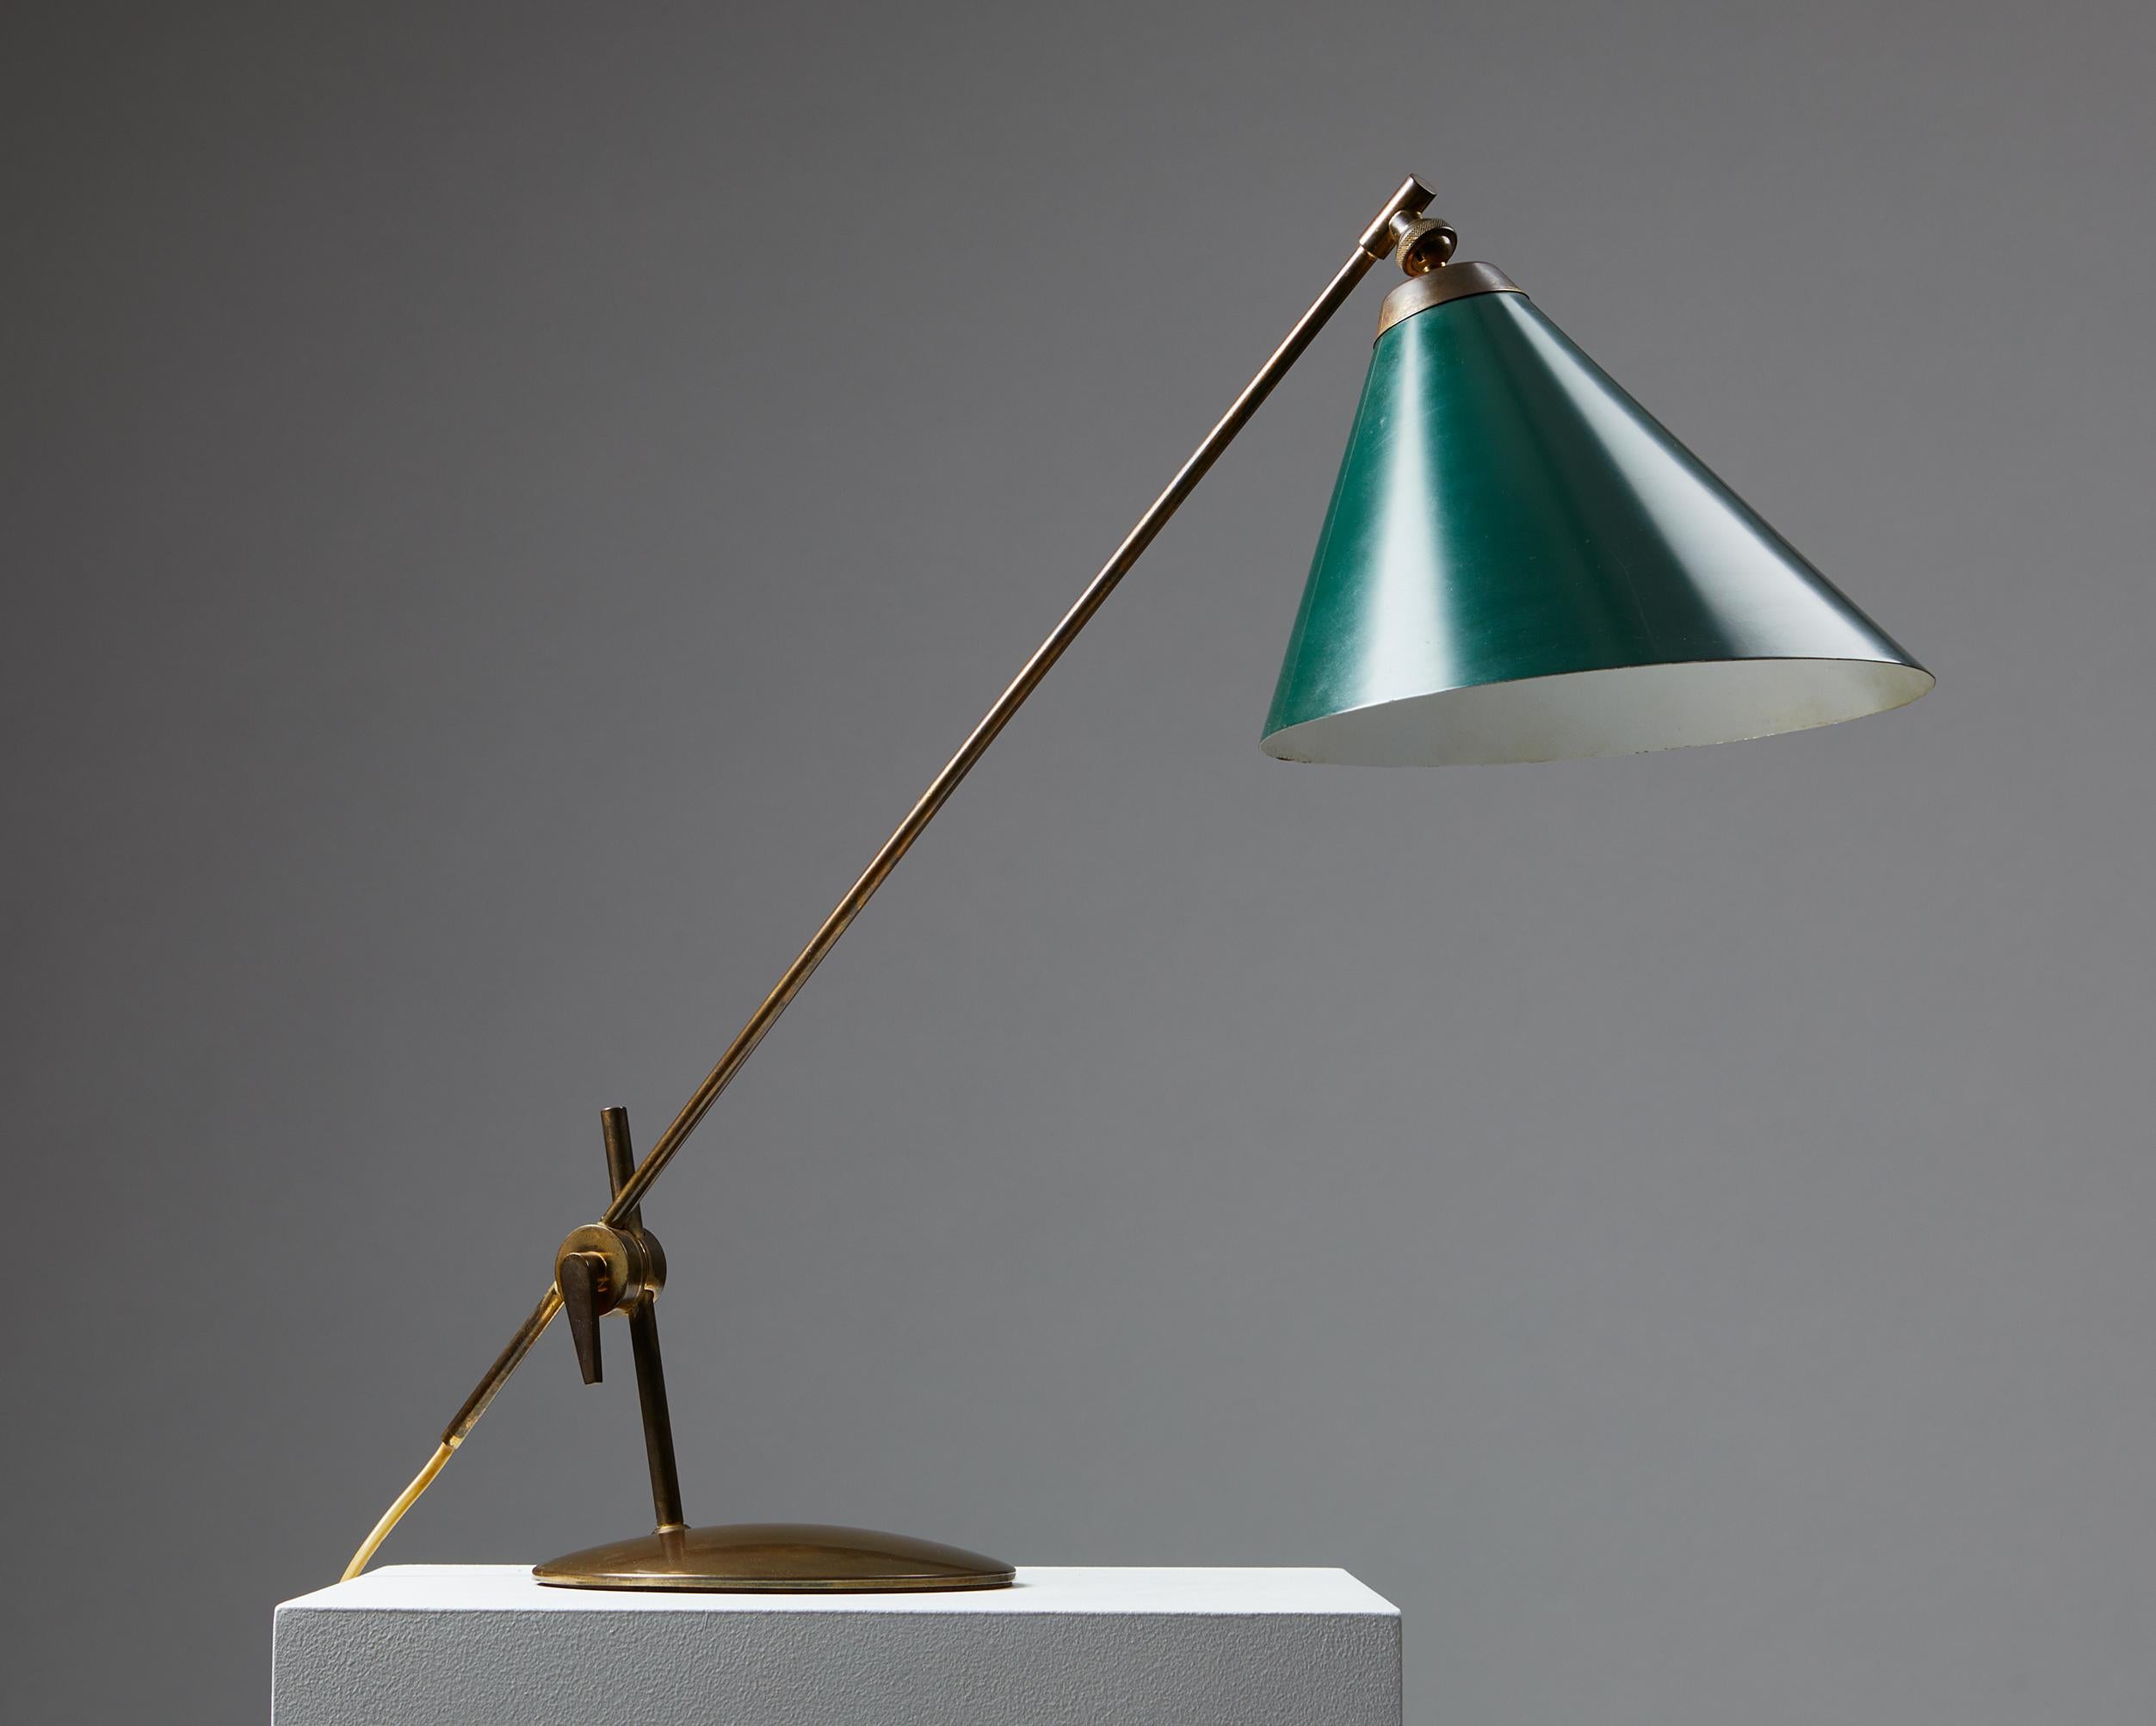 Table lamp ’Valentiner’ designed by Poul Dinesen,
Denmark. 1960s.
Brass and lacquered metal.

Adjustable stem.

Measures: H: 57 cm / 1' 10 1/2